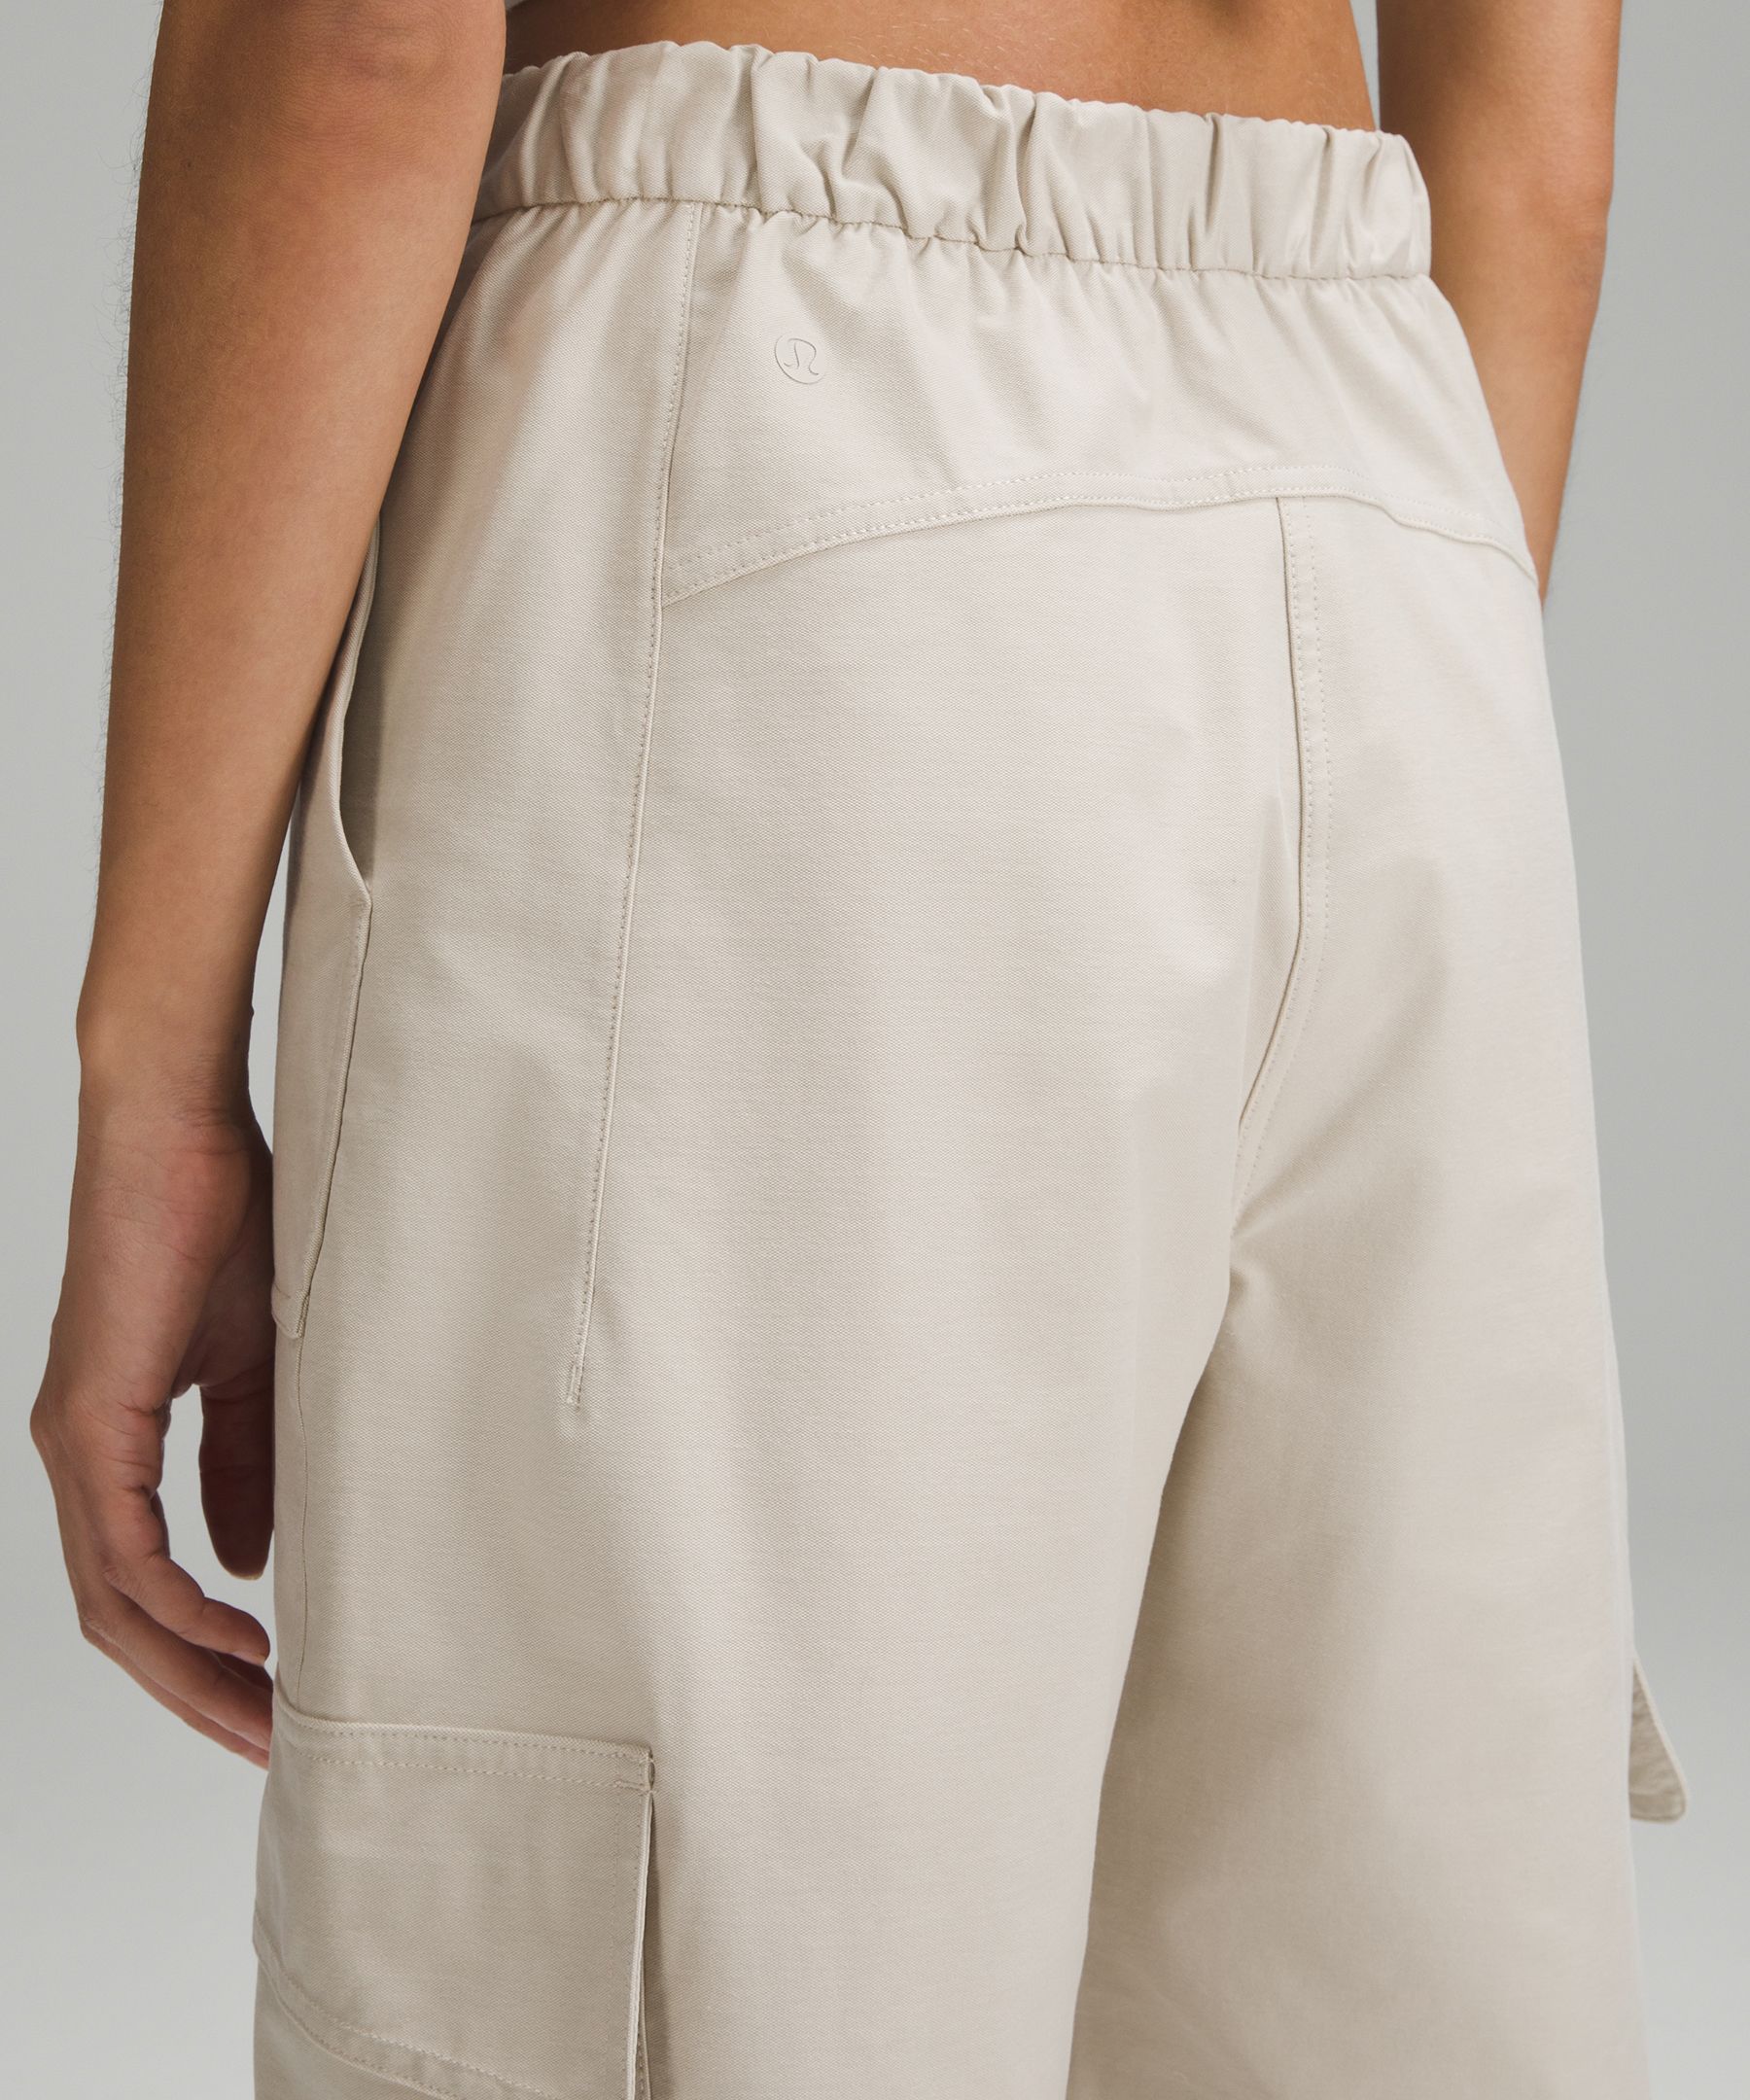 You've Been Warned! You Might Need These New lululemon Cargo Pants:  lululemon Light Utilitech Cargo Pocket High-Rise Pant - The Sweat Edit